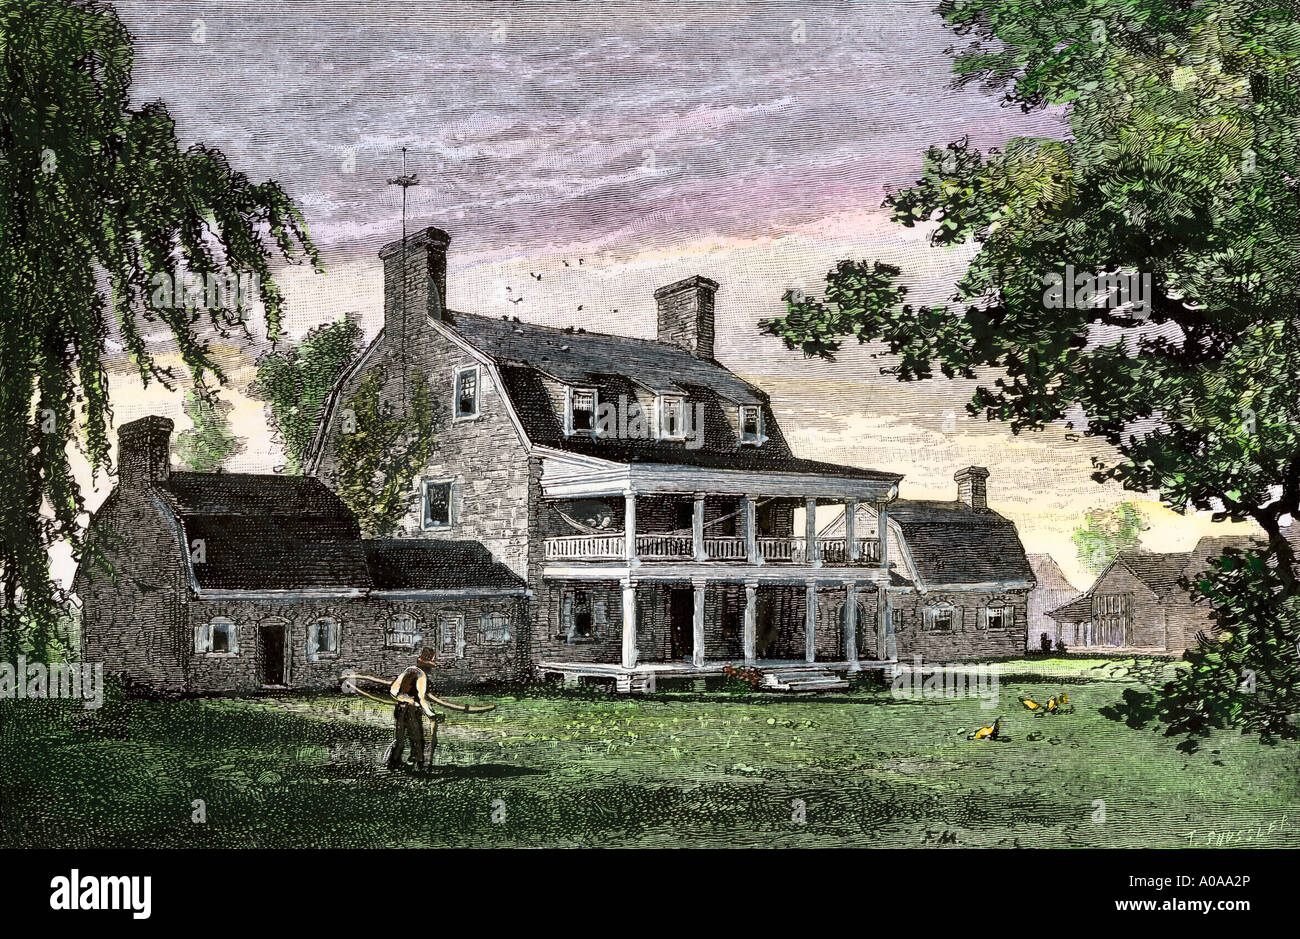 Maryland plantation manor house with outbuildings 1800s. Hand-colored woodcut Stock Photo